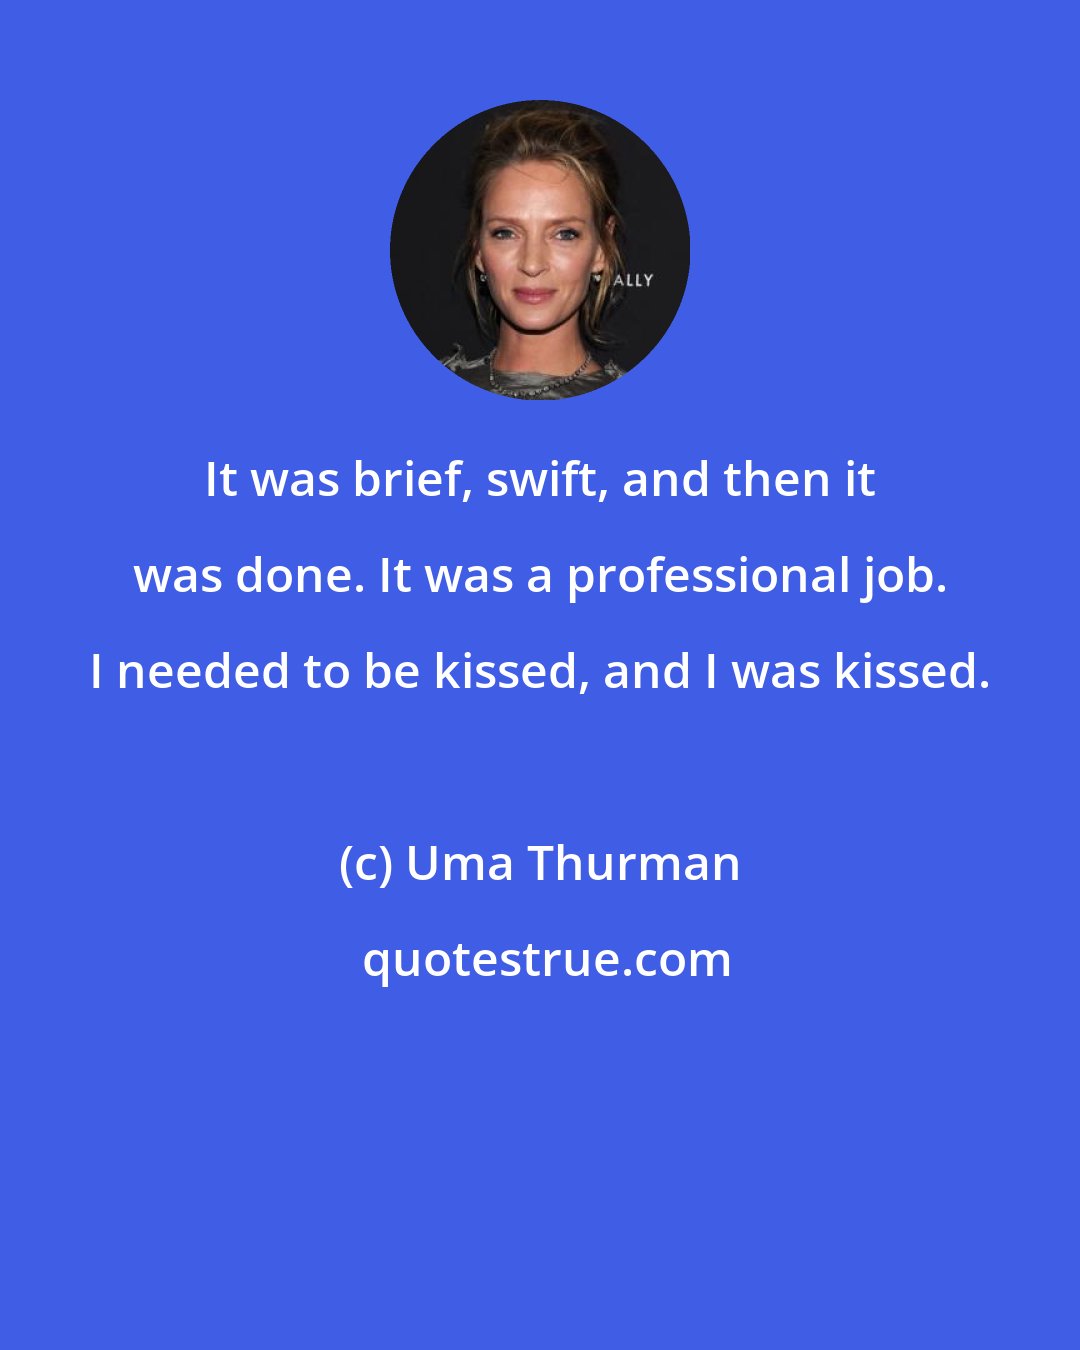 Uma Thurman: It was brief, swift, and then it was done. It was a professional job. I needed to be kissed, and I was kissed.